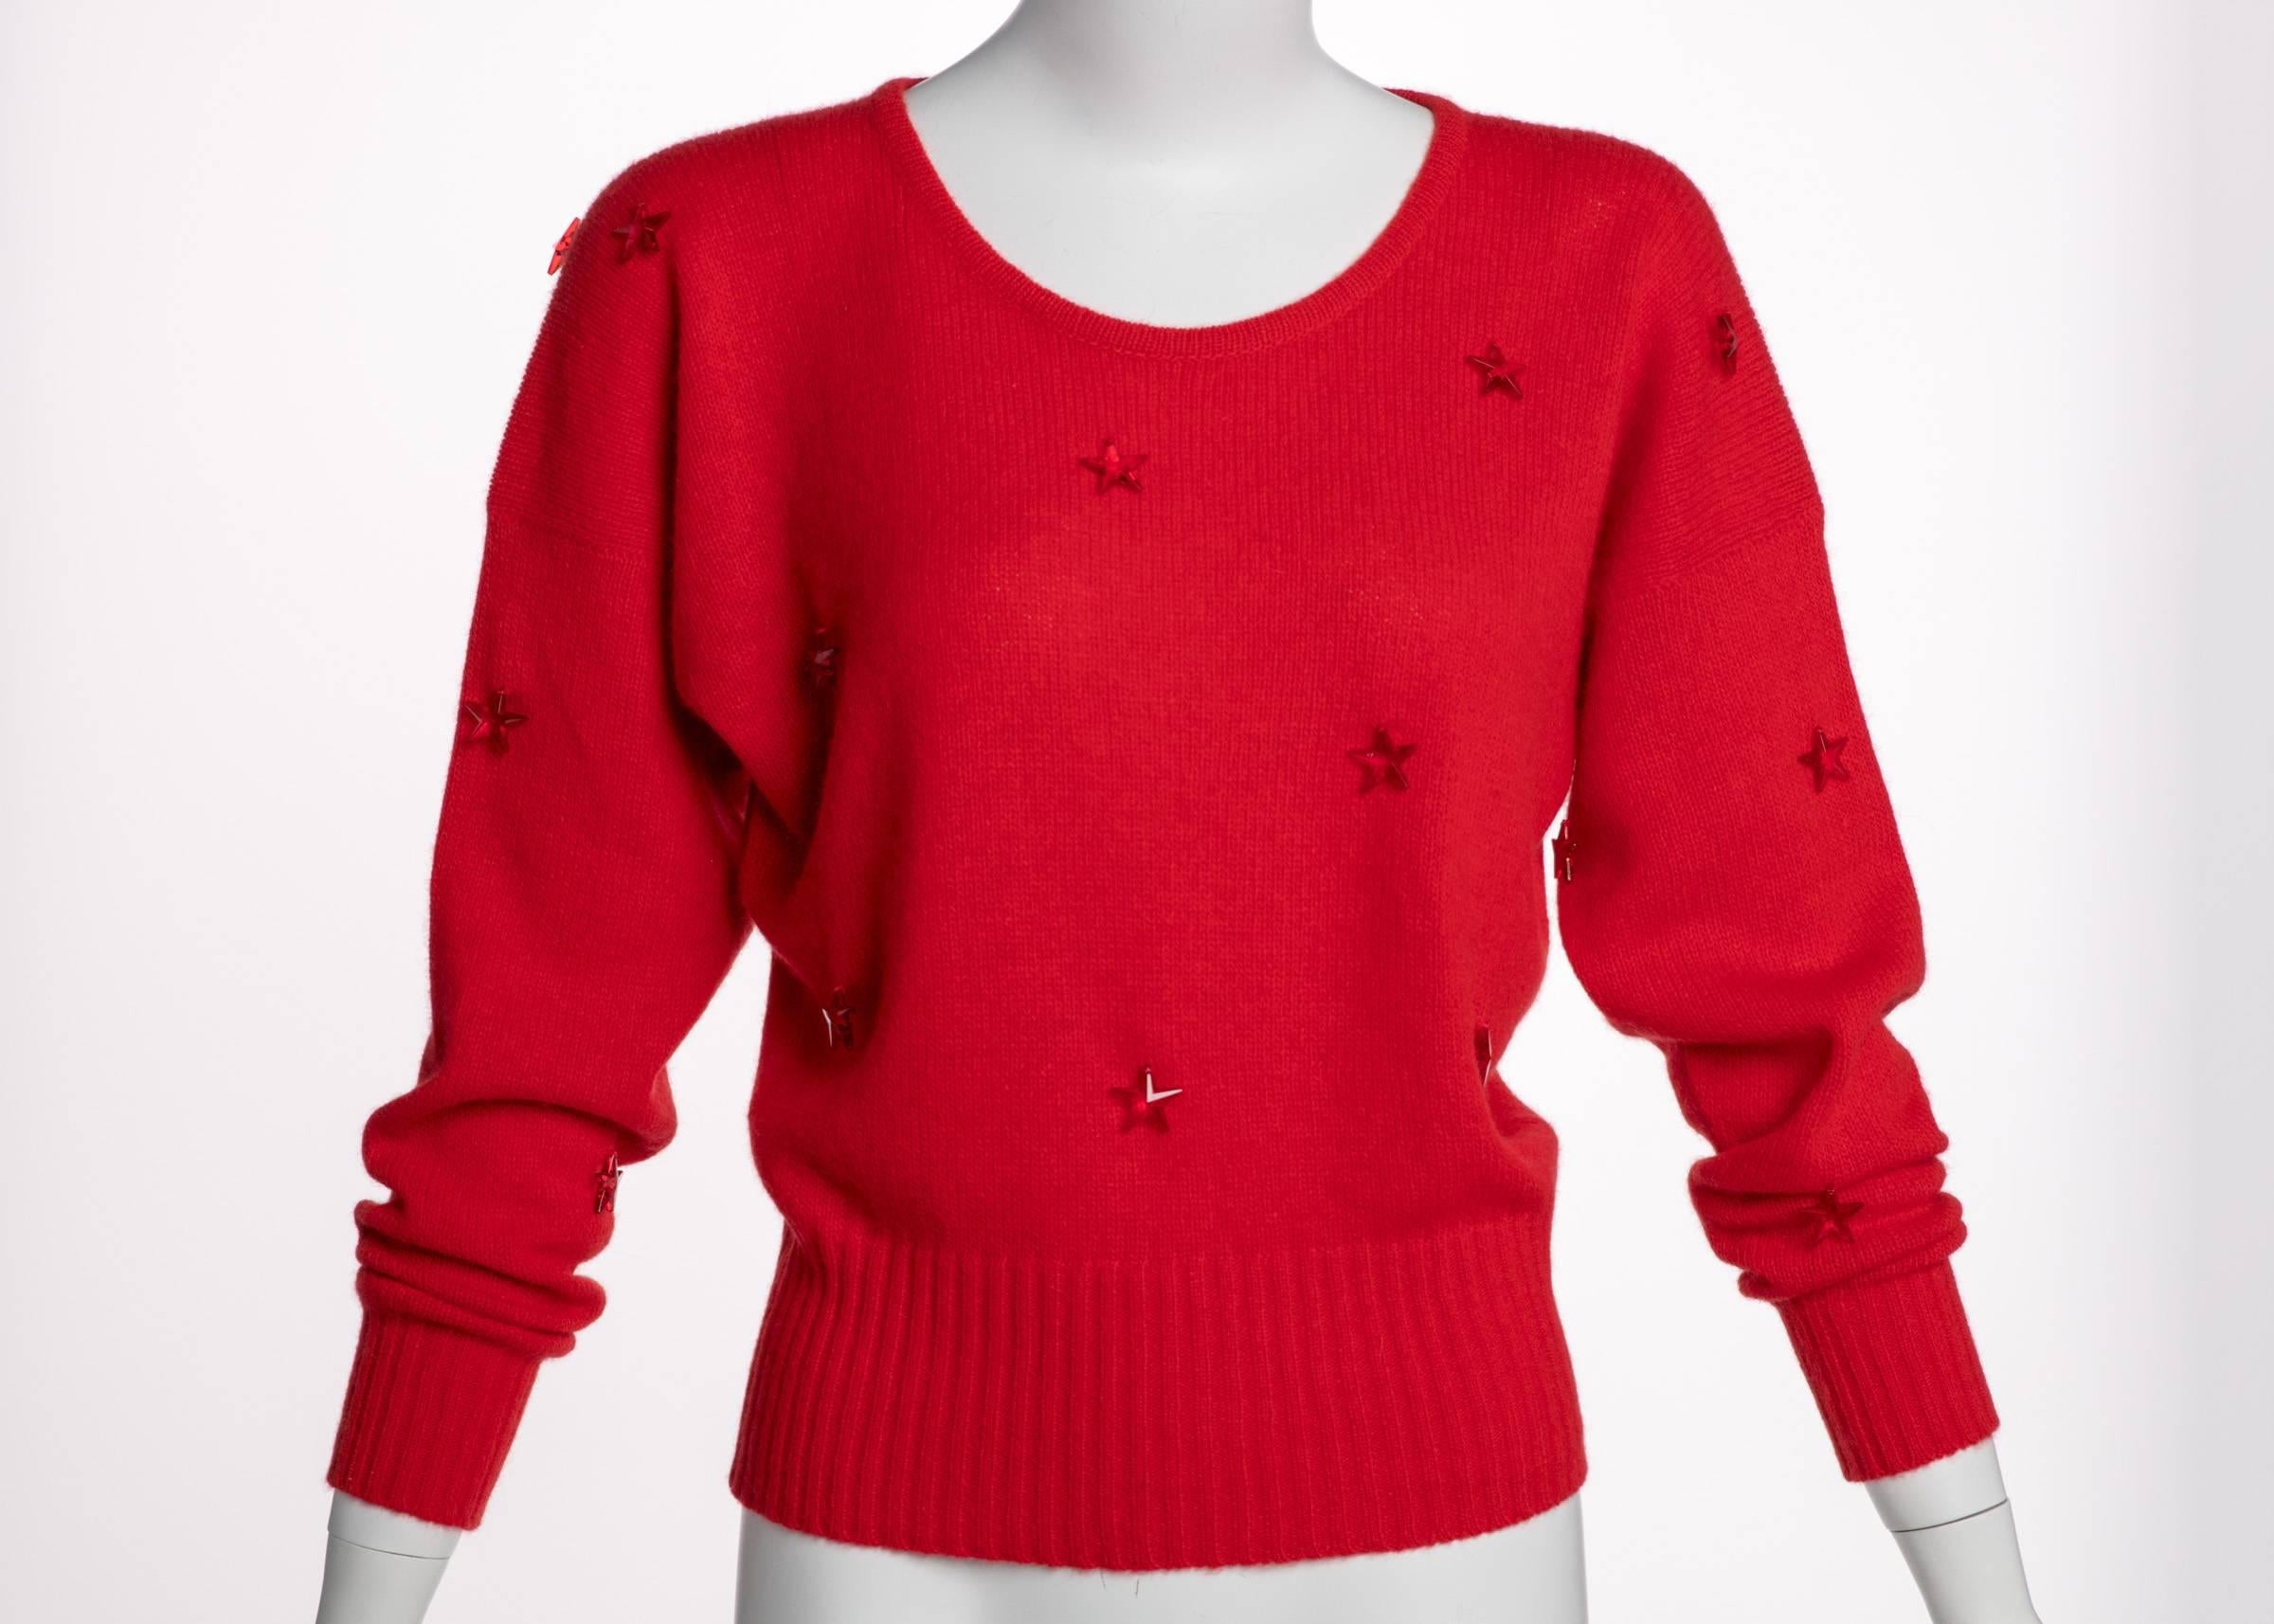 Krizia’s co-founder and designer, Mariuccia Mandella, loved bold colors and designs.  Known for designing sweaters with enormous animals, the 1980s were a perfect era for her nervy eclecticism. This sweater explores a powerful brand of femininity